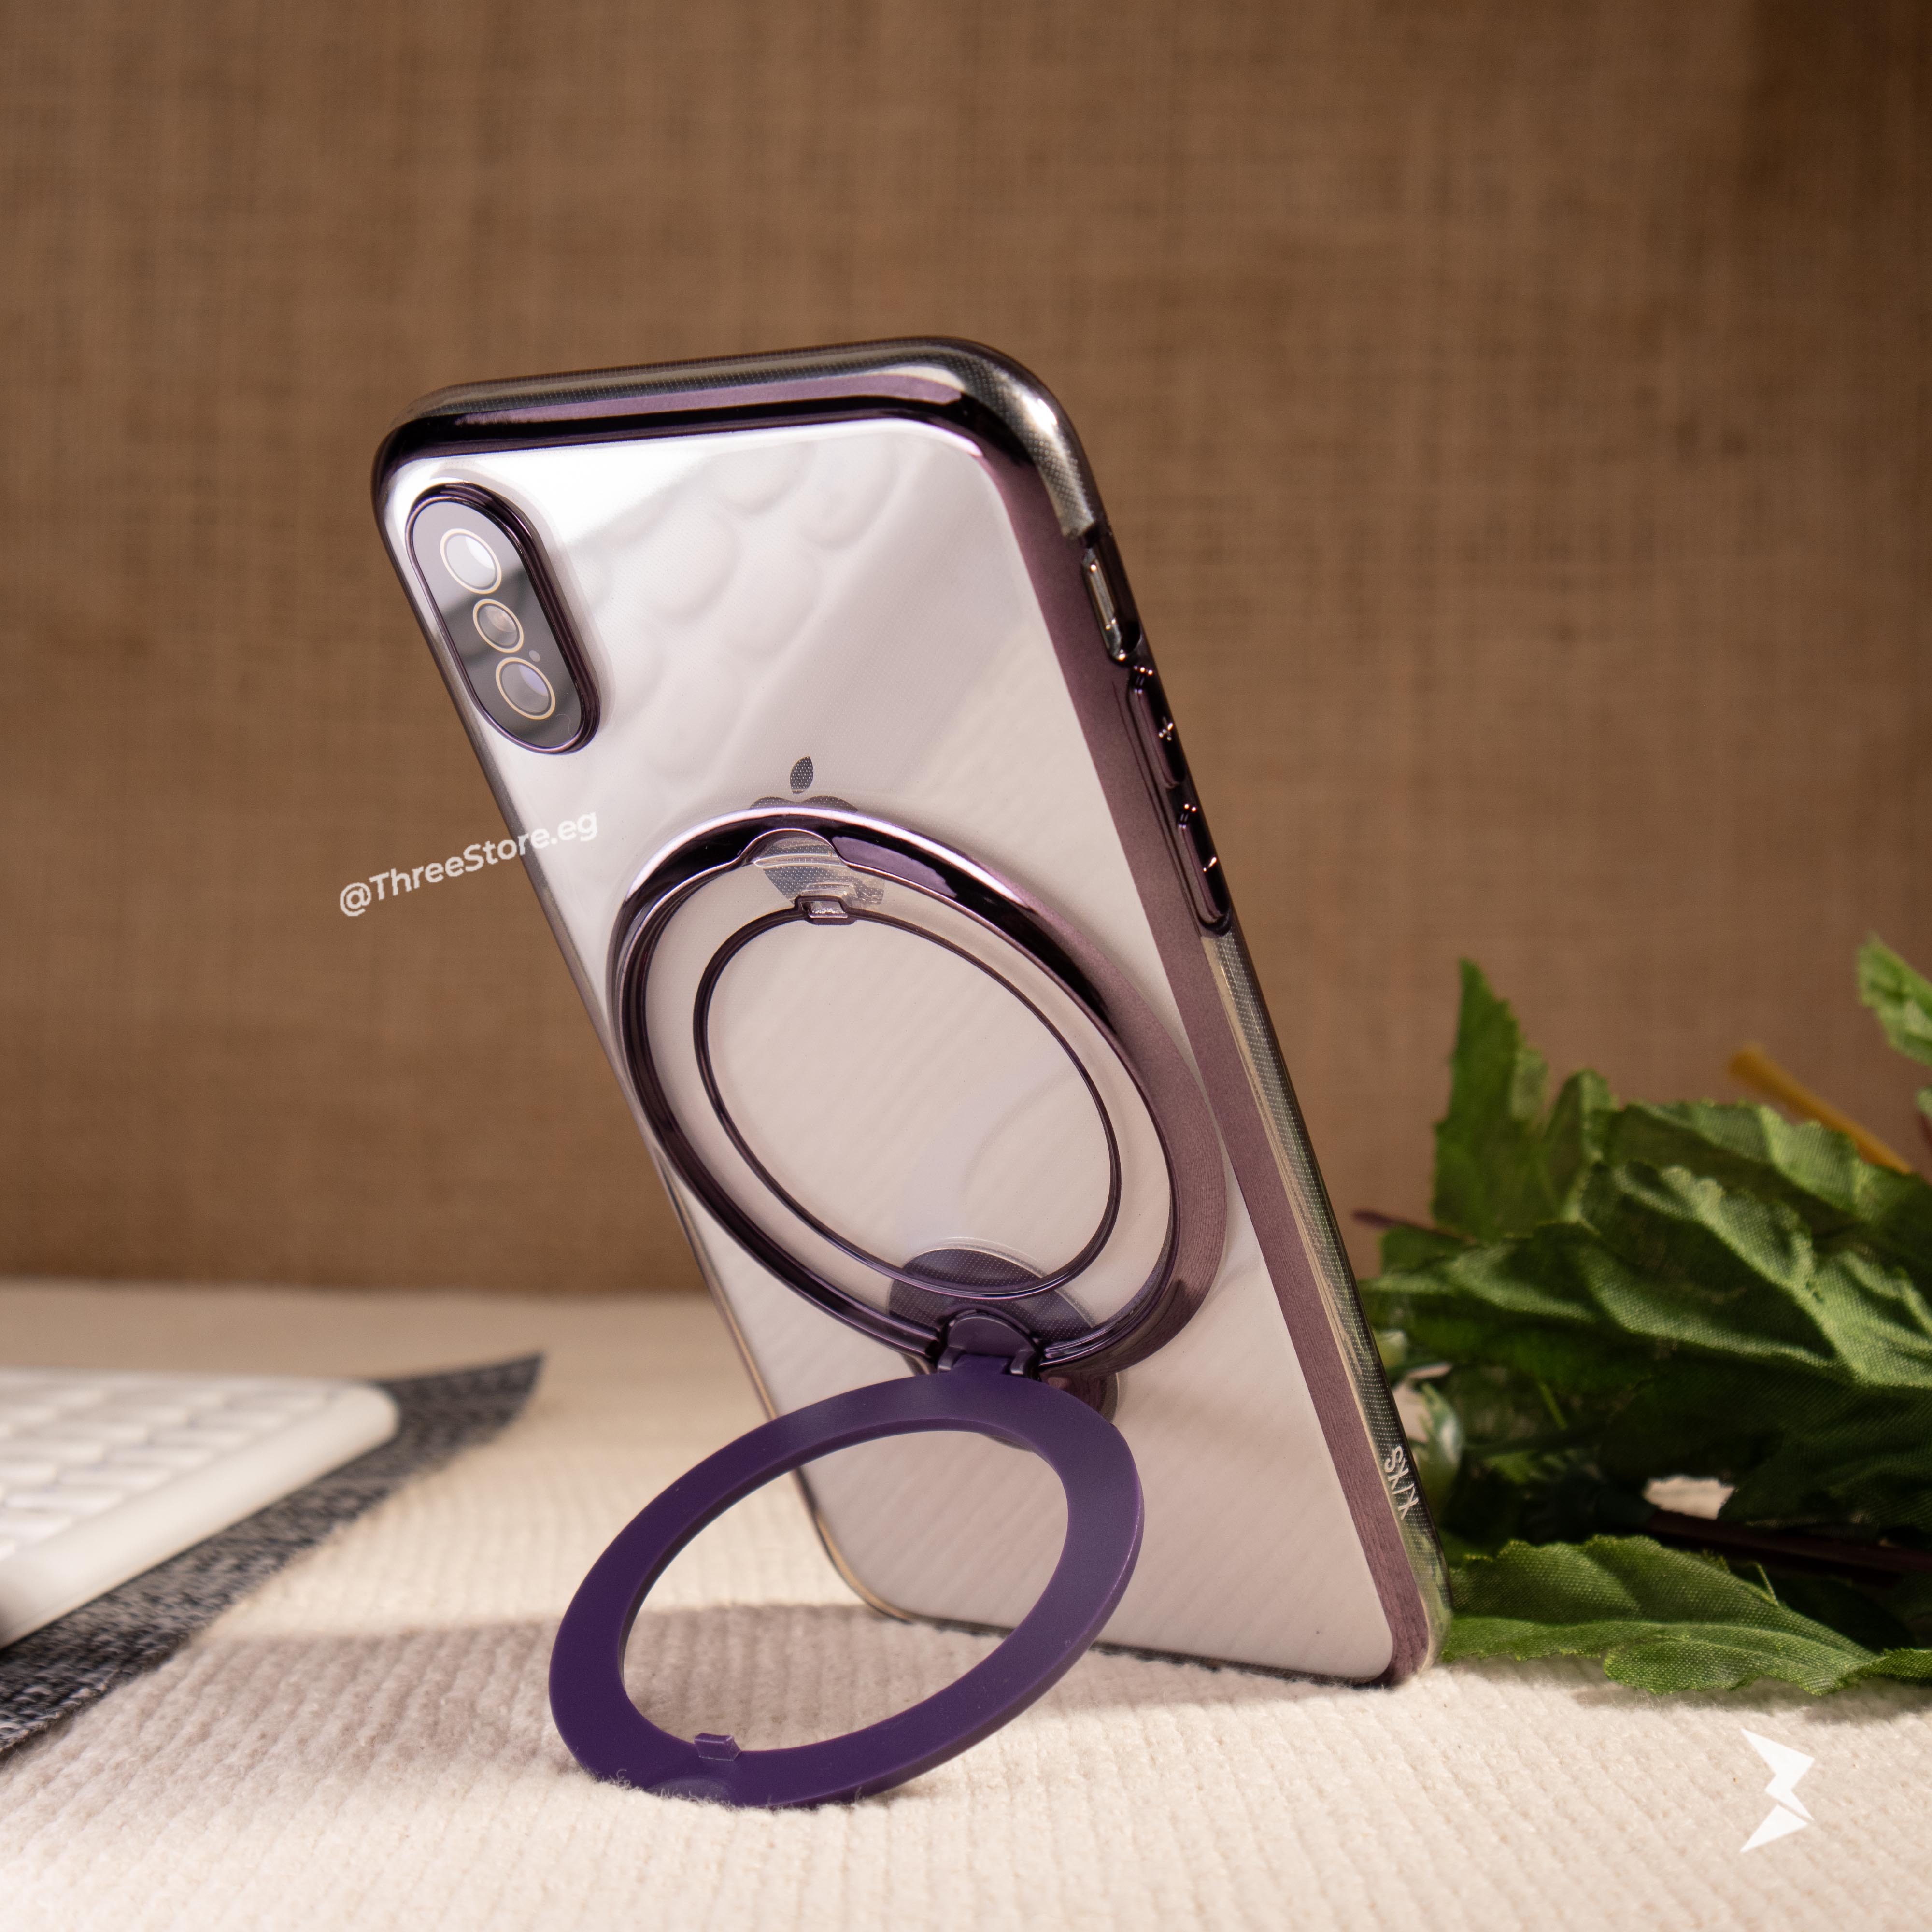 Stand Magsafe Transparent Case iPhone X Max